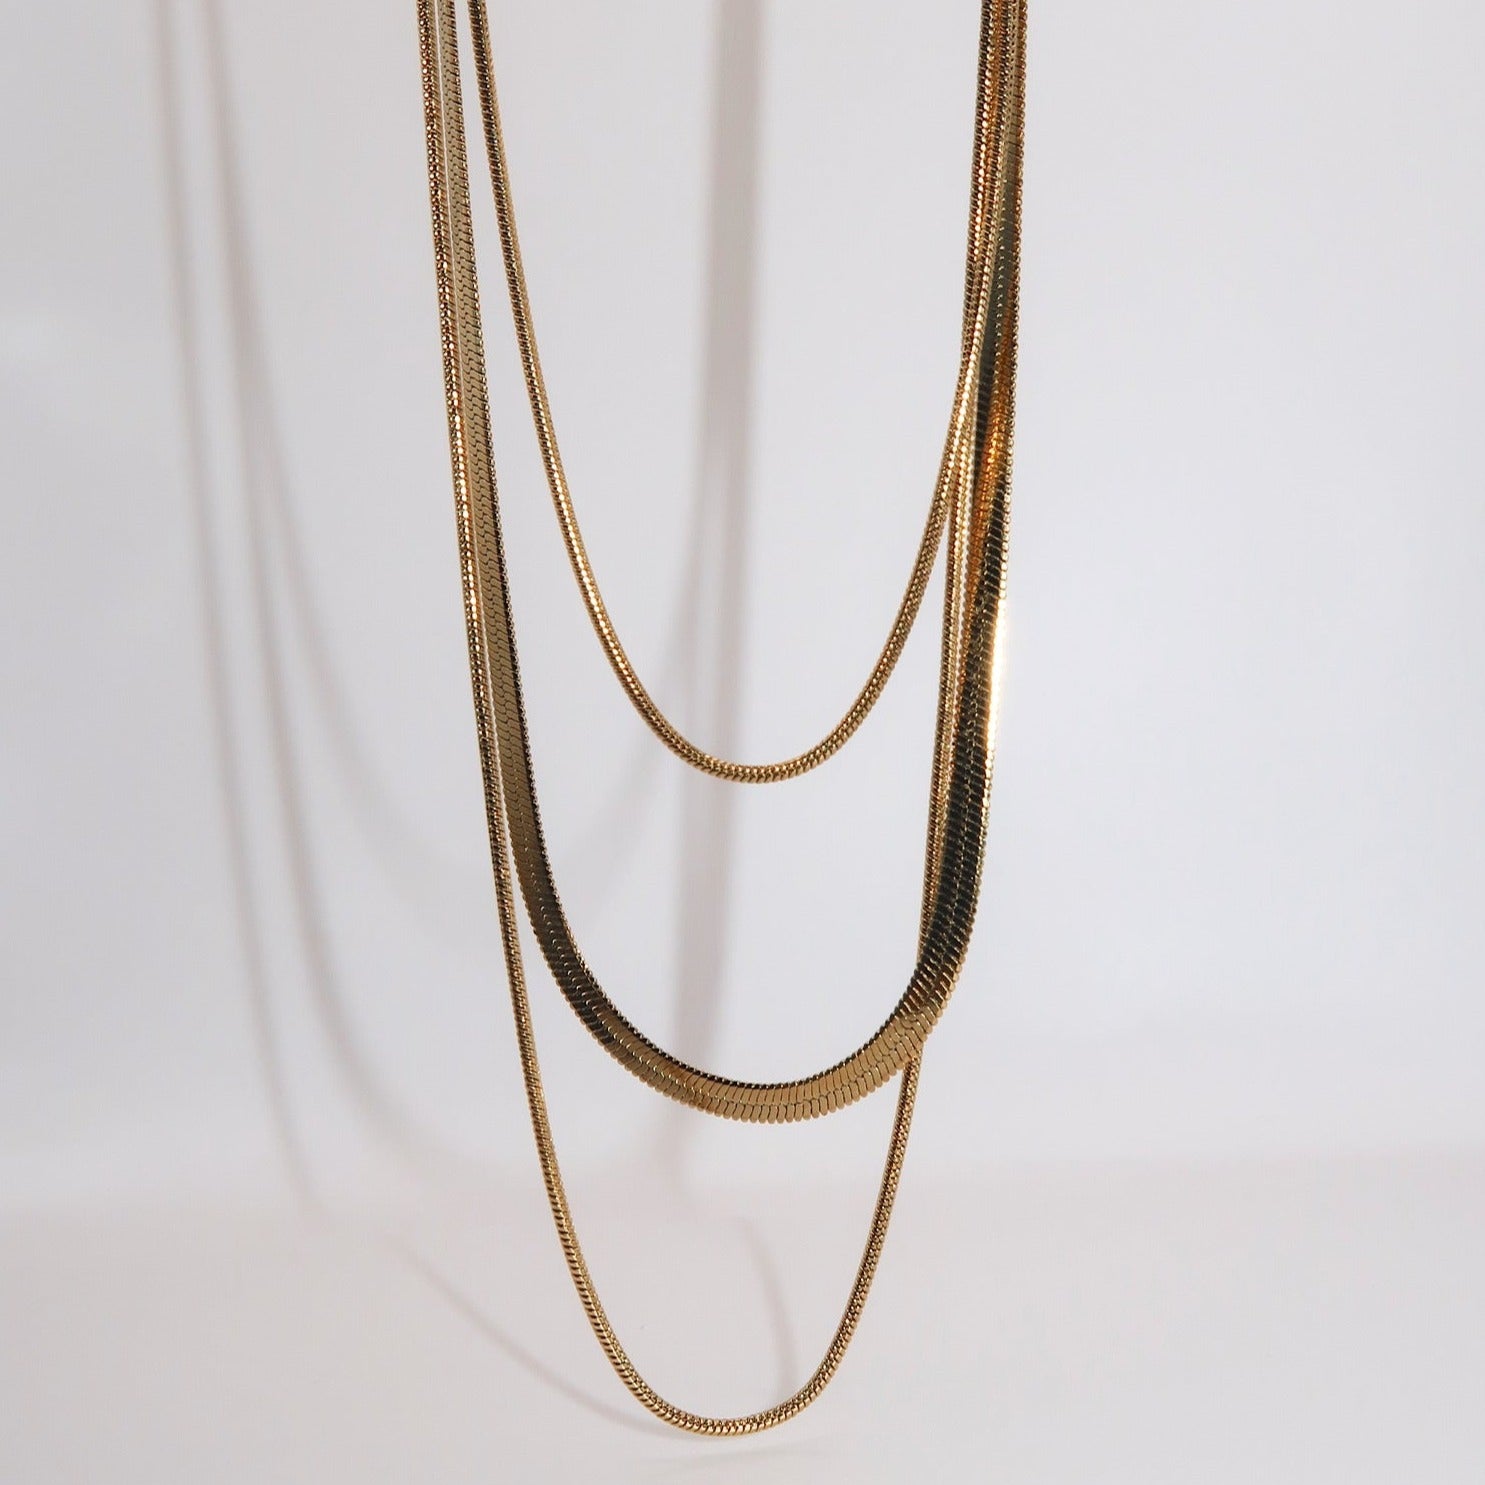 NOVA- 18K PVD Gold Plated Triple Layered Herringbone Necklace - Mixed Metals